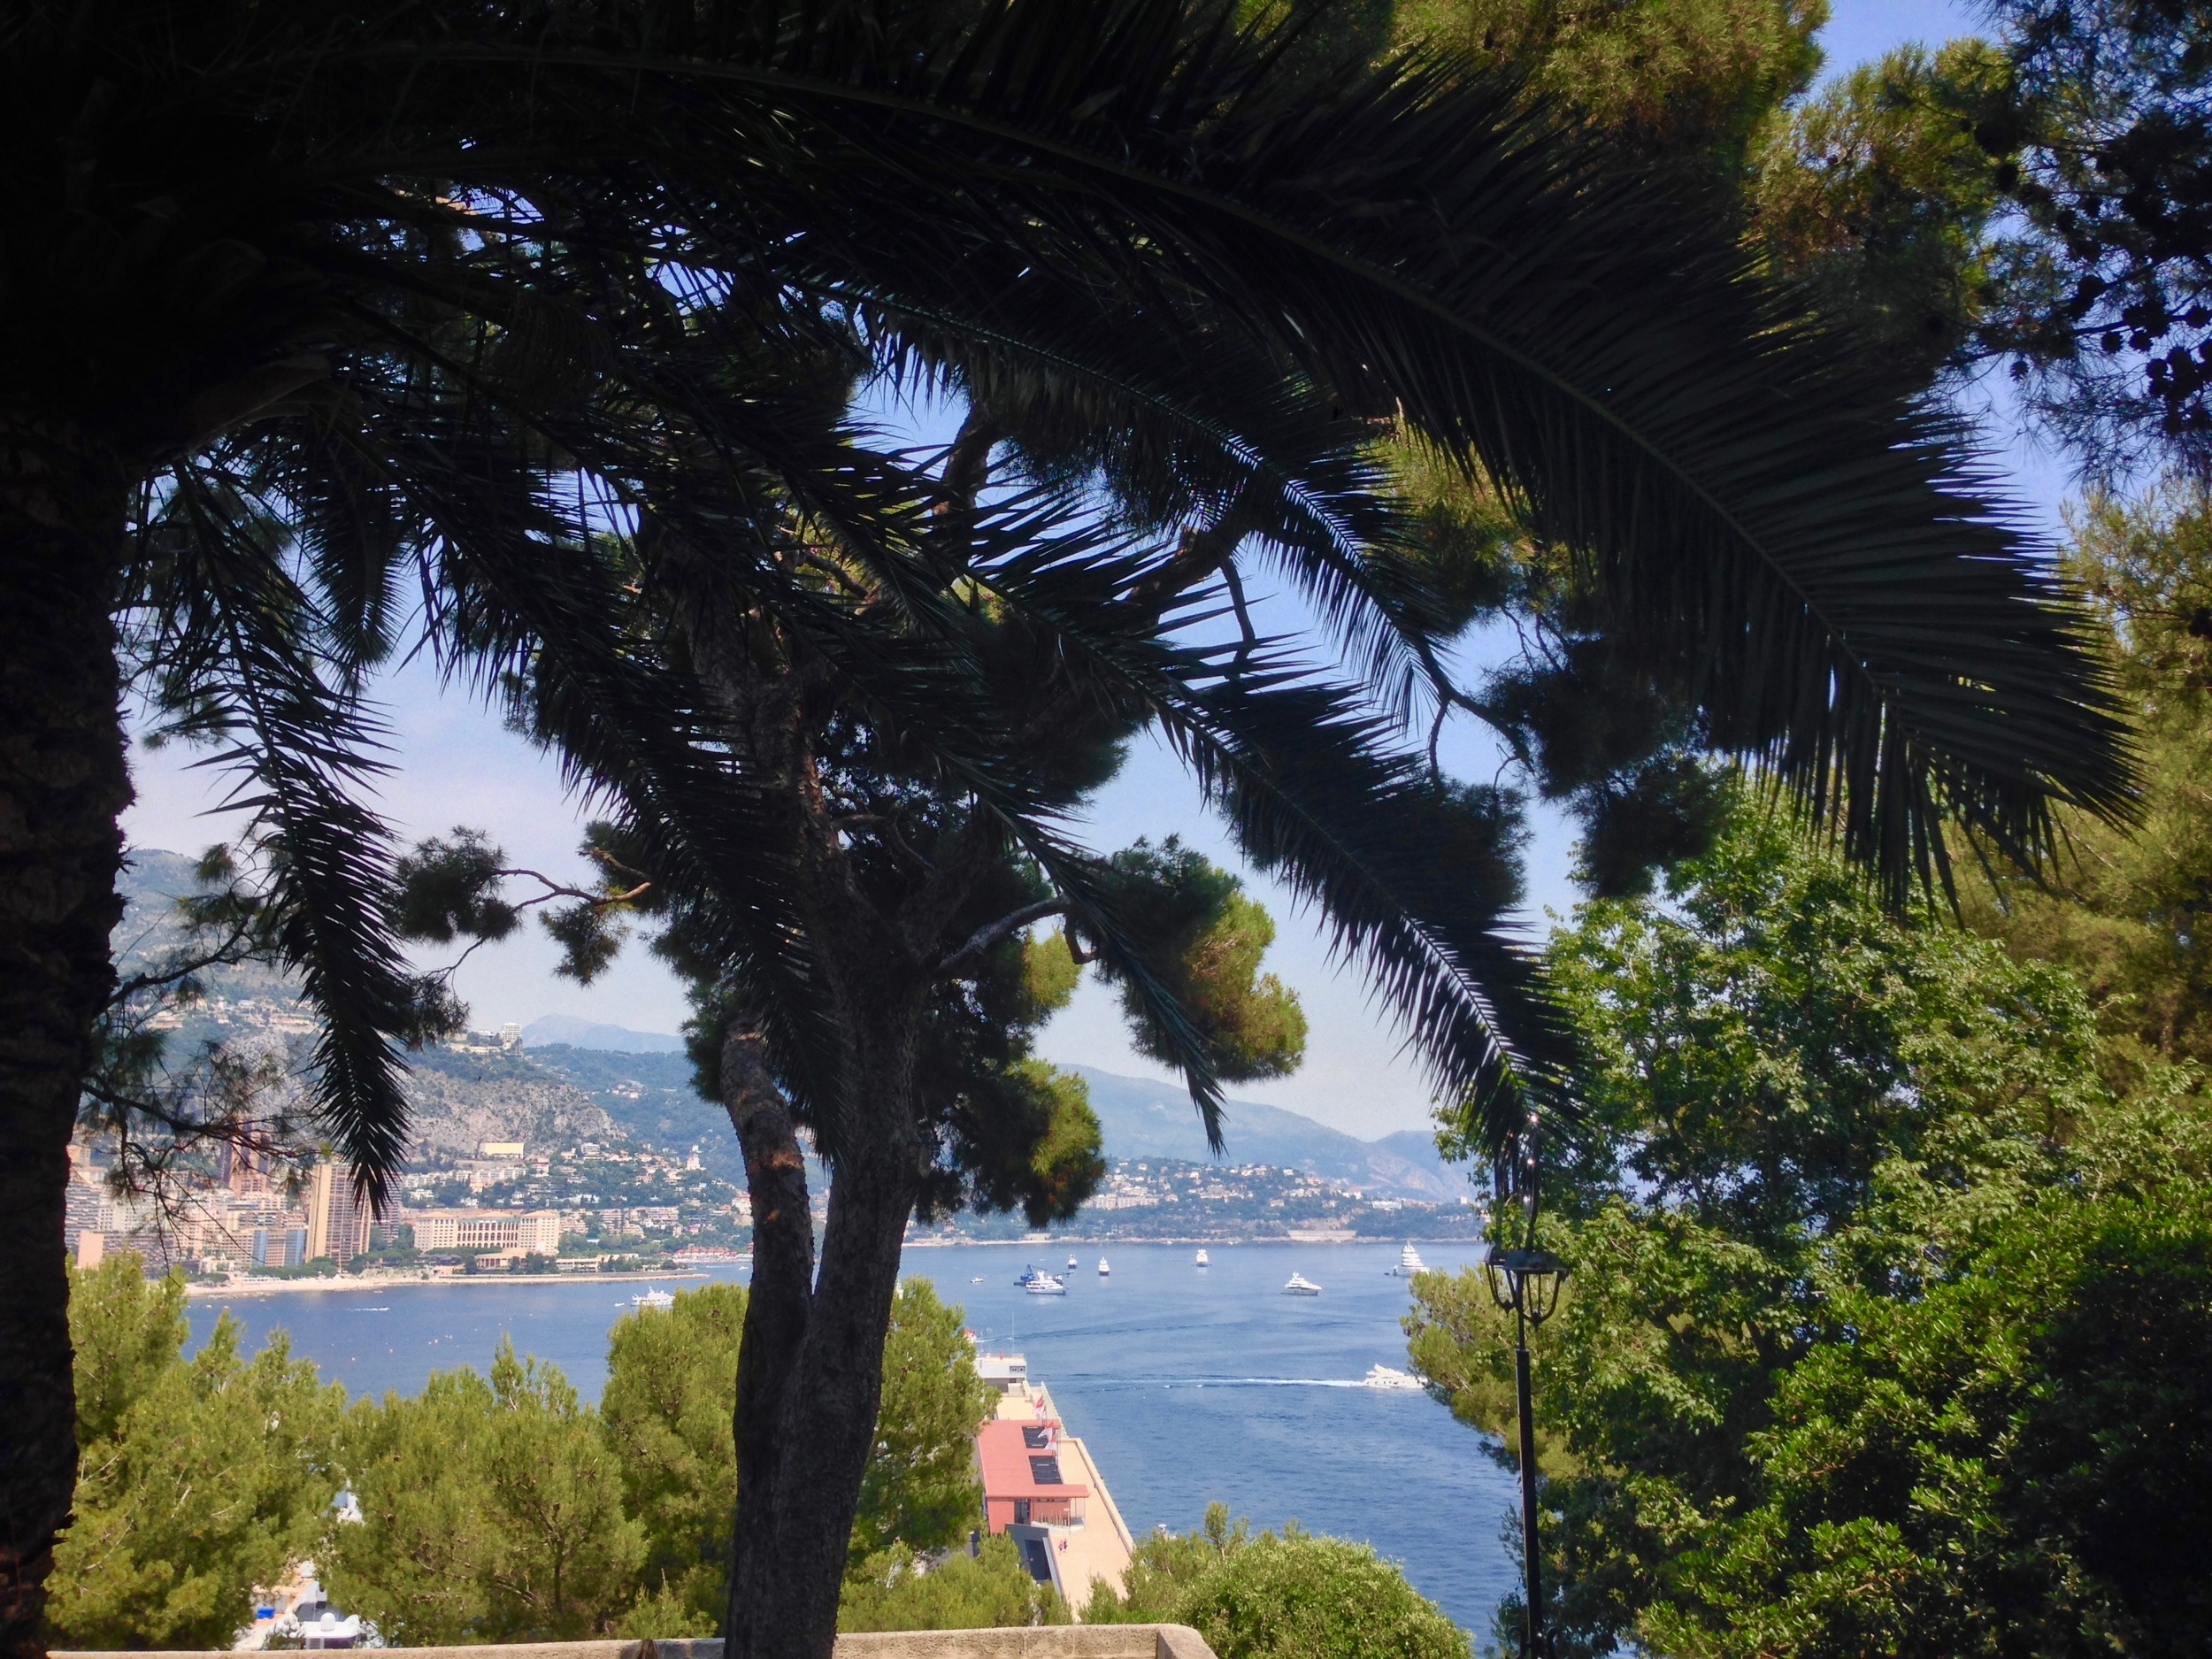 Panoramic View from the Top of the hill - Monaco - Côte d'Azur - South of France (French Riviera)